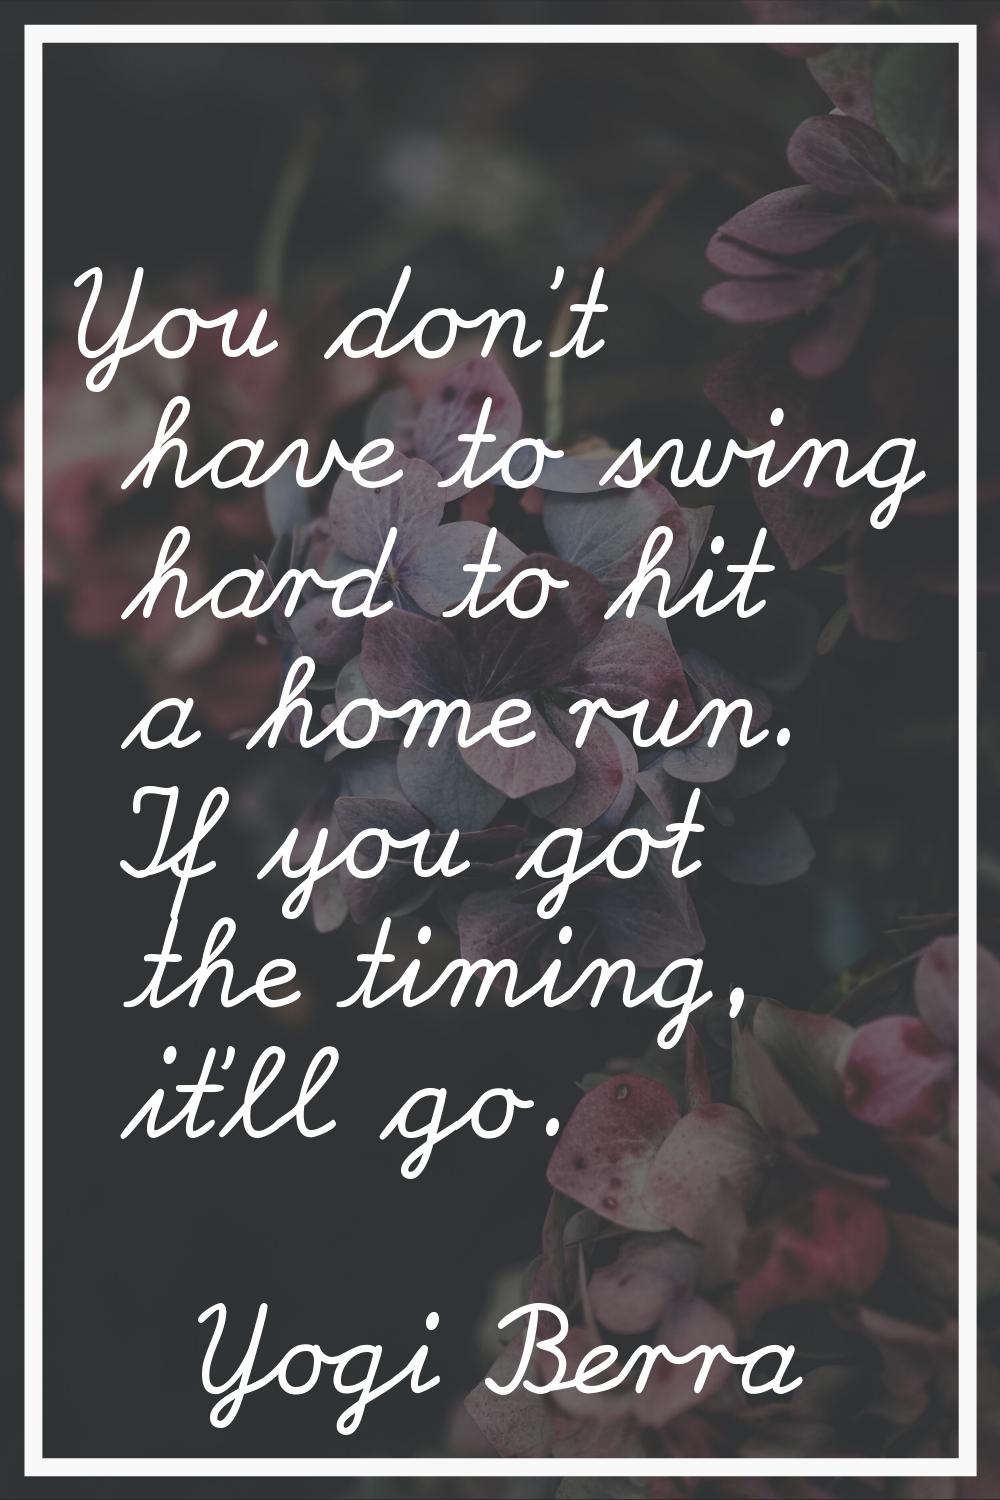 You don't have to swing hard to hit a home run. If you got the timing, it'll go.